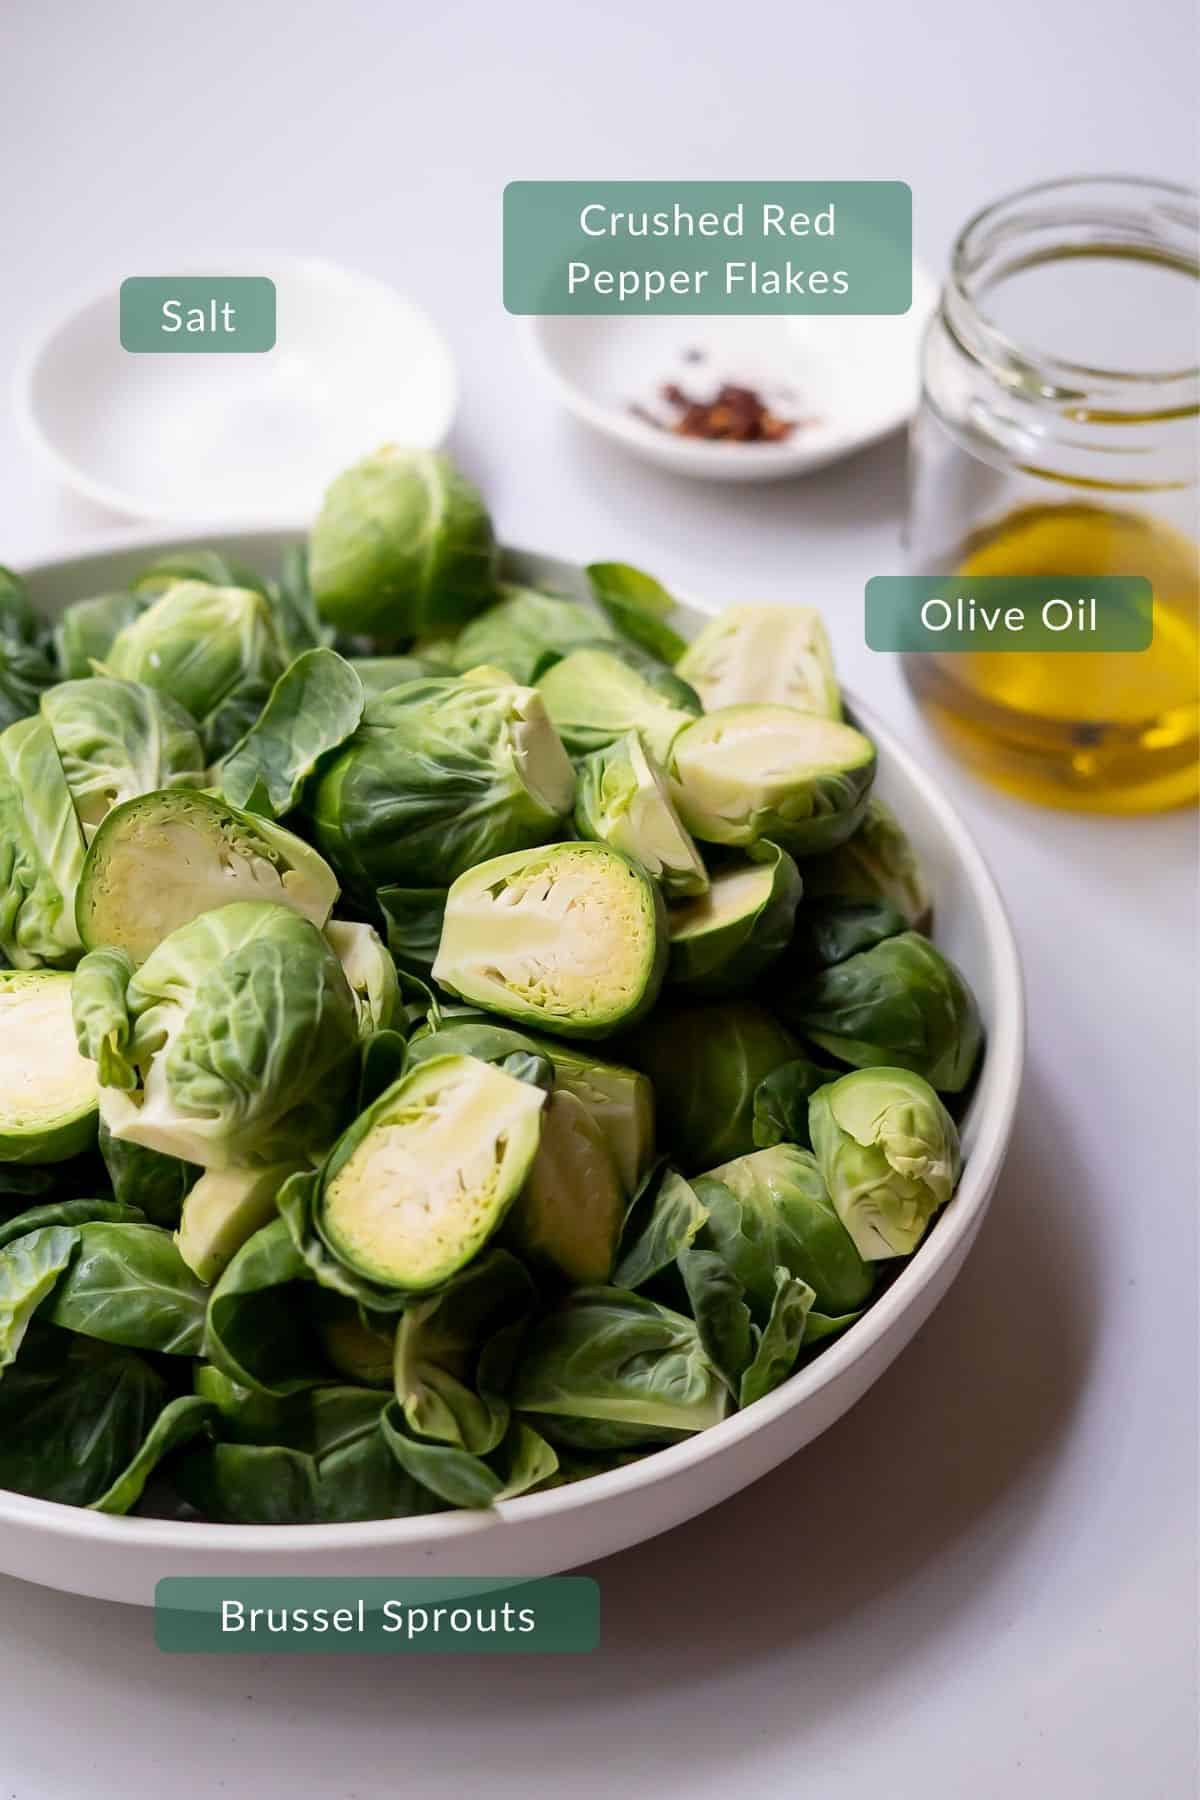 The four ingredients you need to make this recipe in correct measurements: brussel sprouts, olive oil, salt, and red pepper flakes.